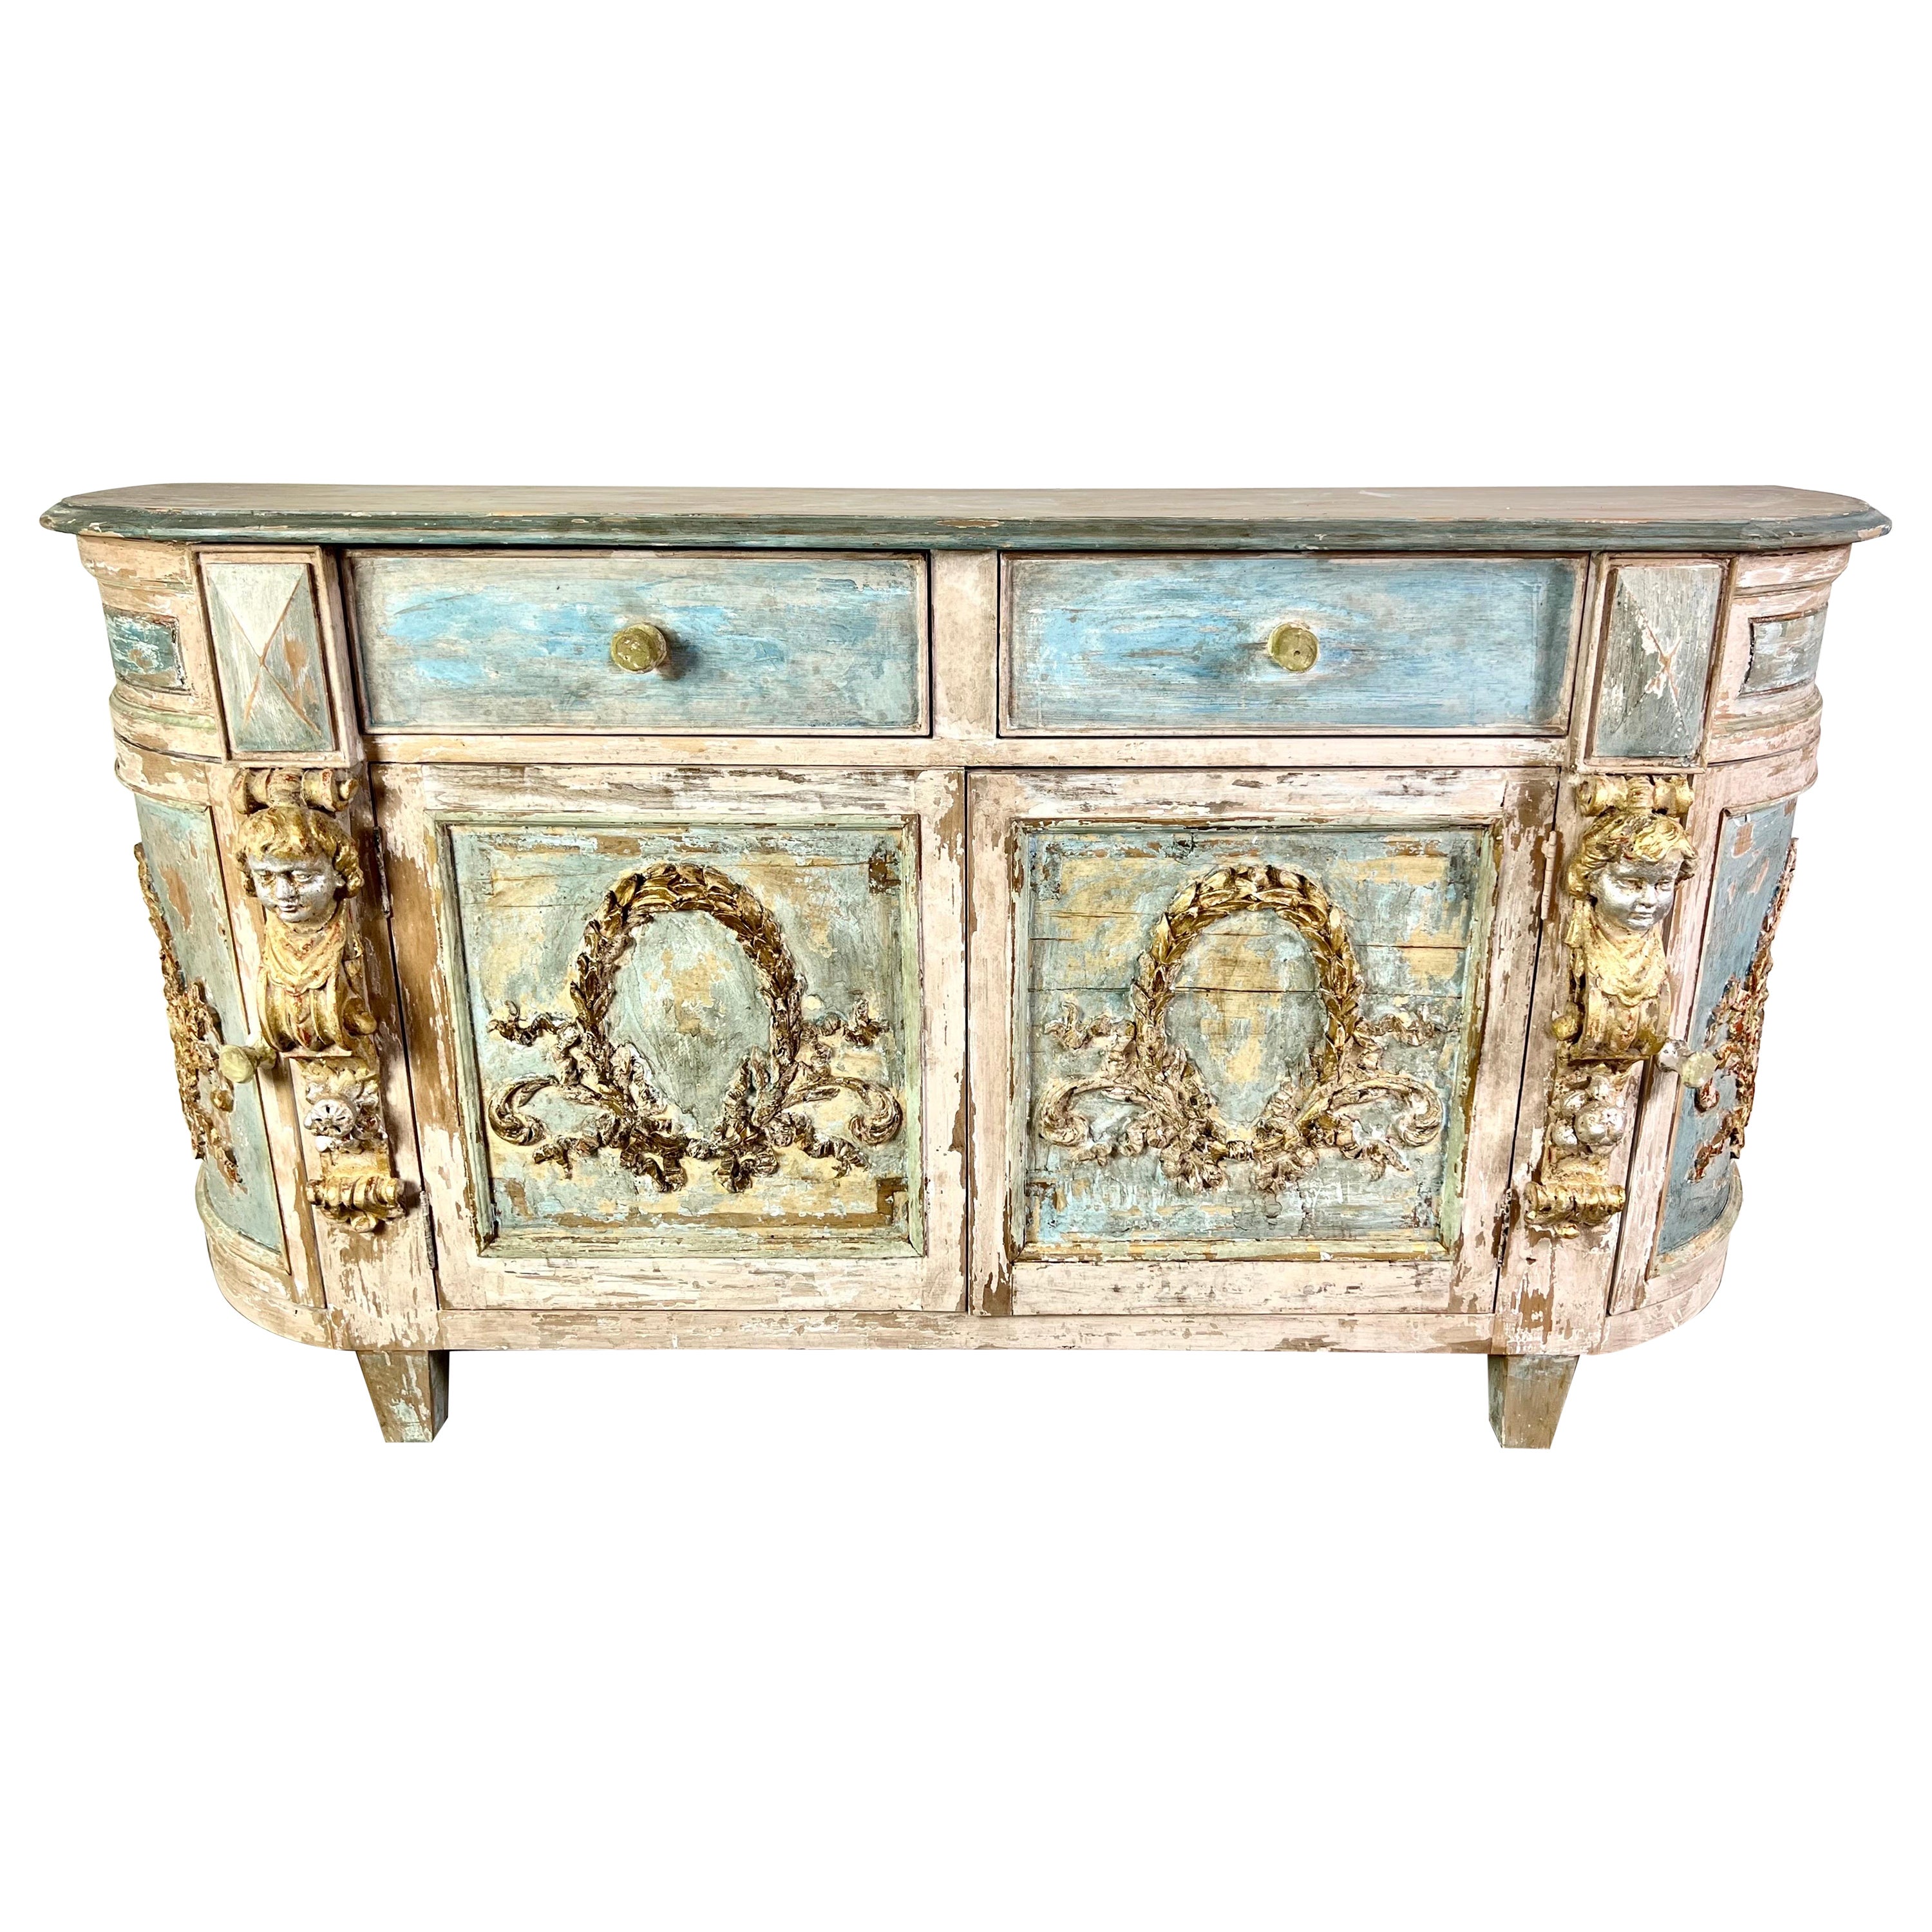  Italian Neoclassical style Painted & Parcel Gilt Credenza